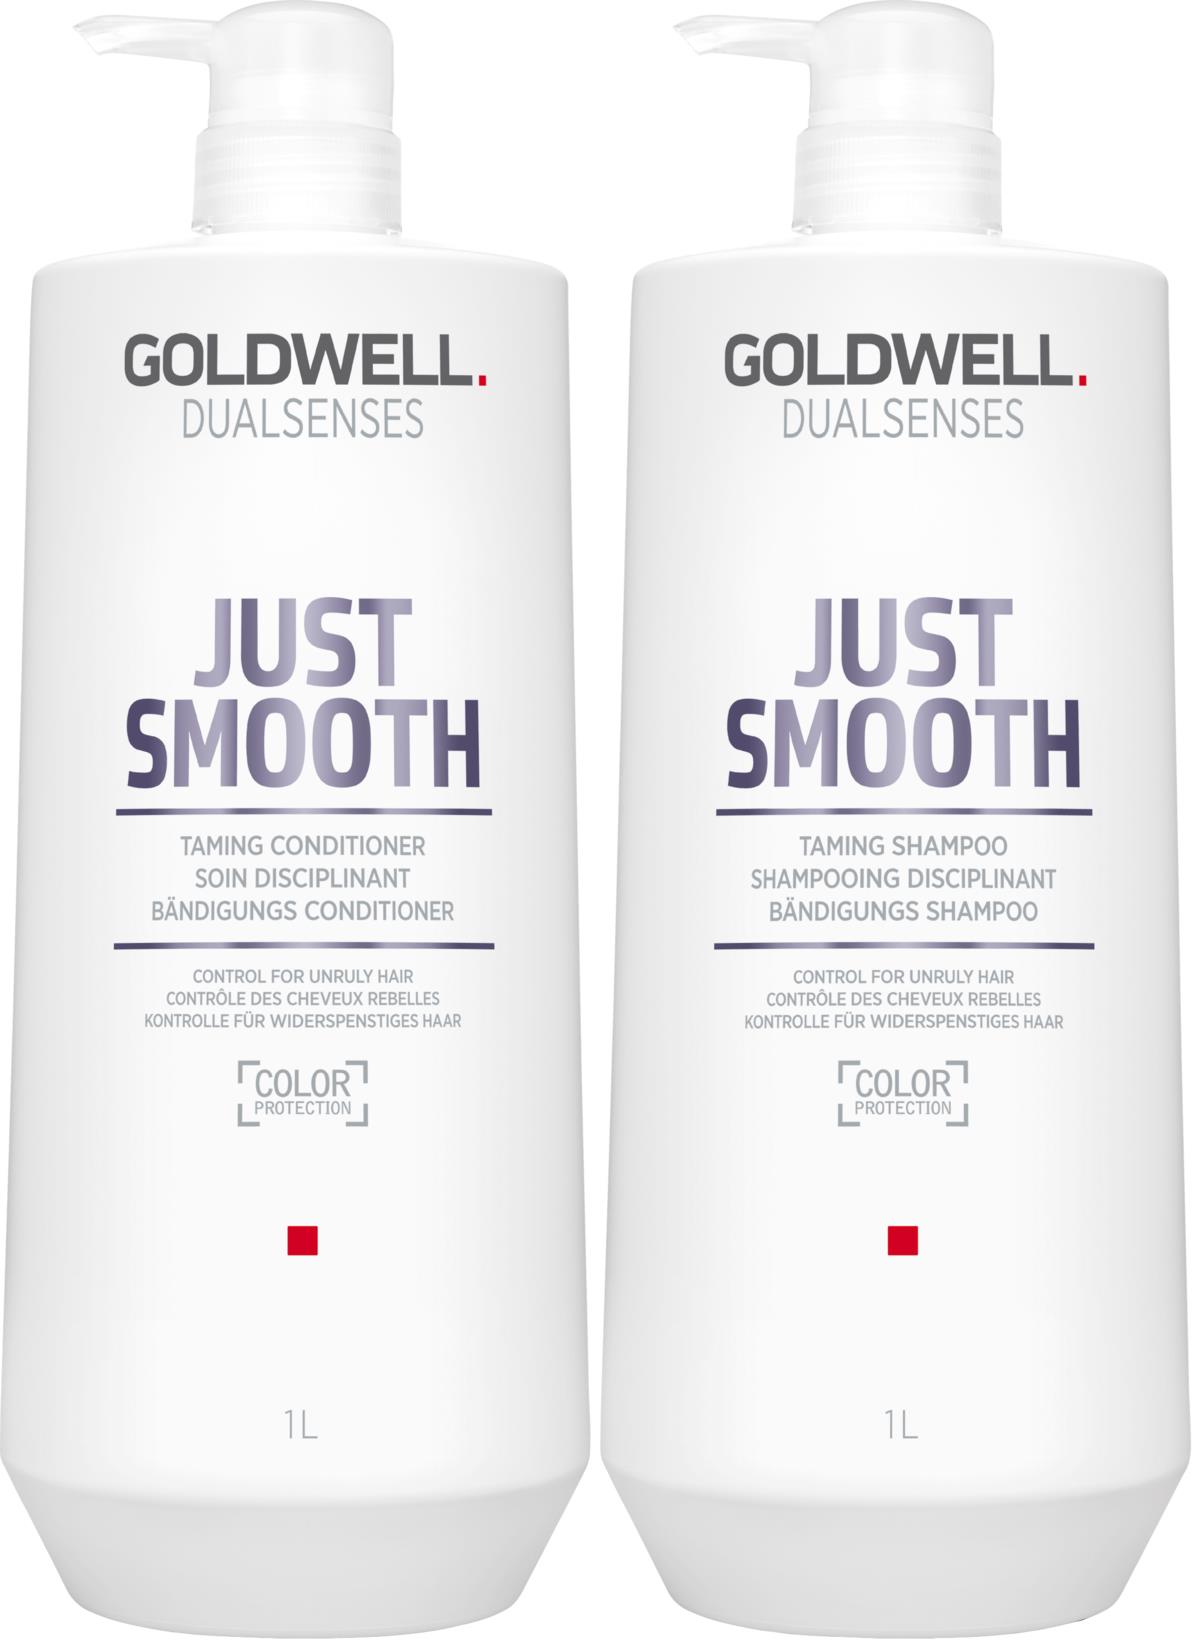 Goldwell Dualsenses Just Smooth lyko.com